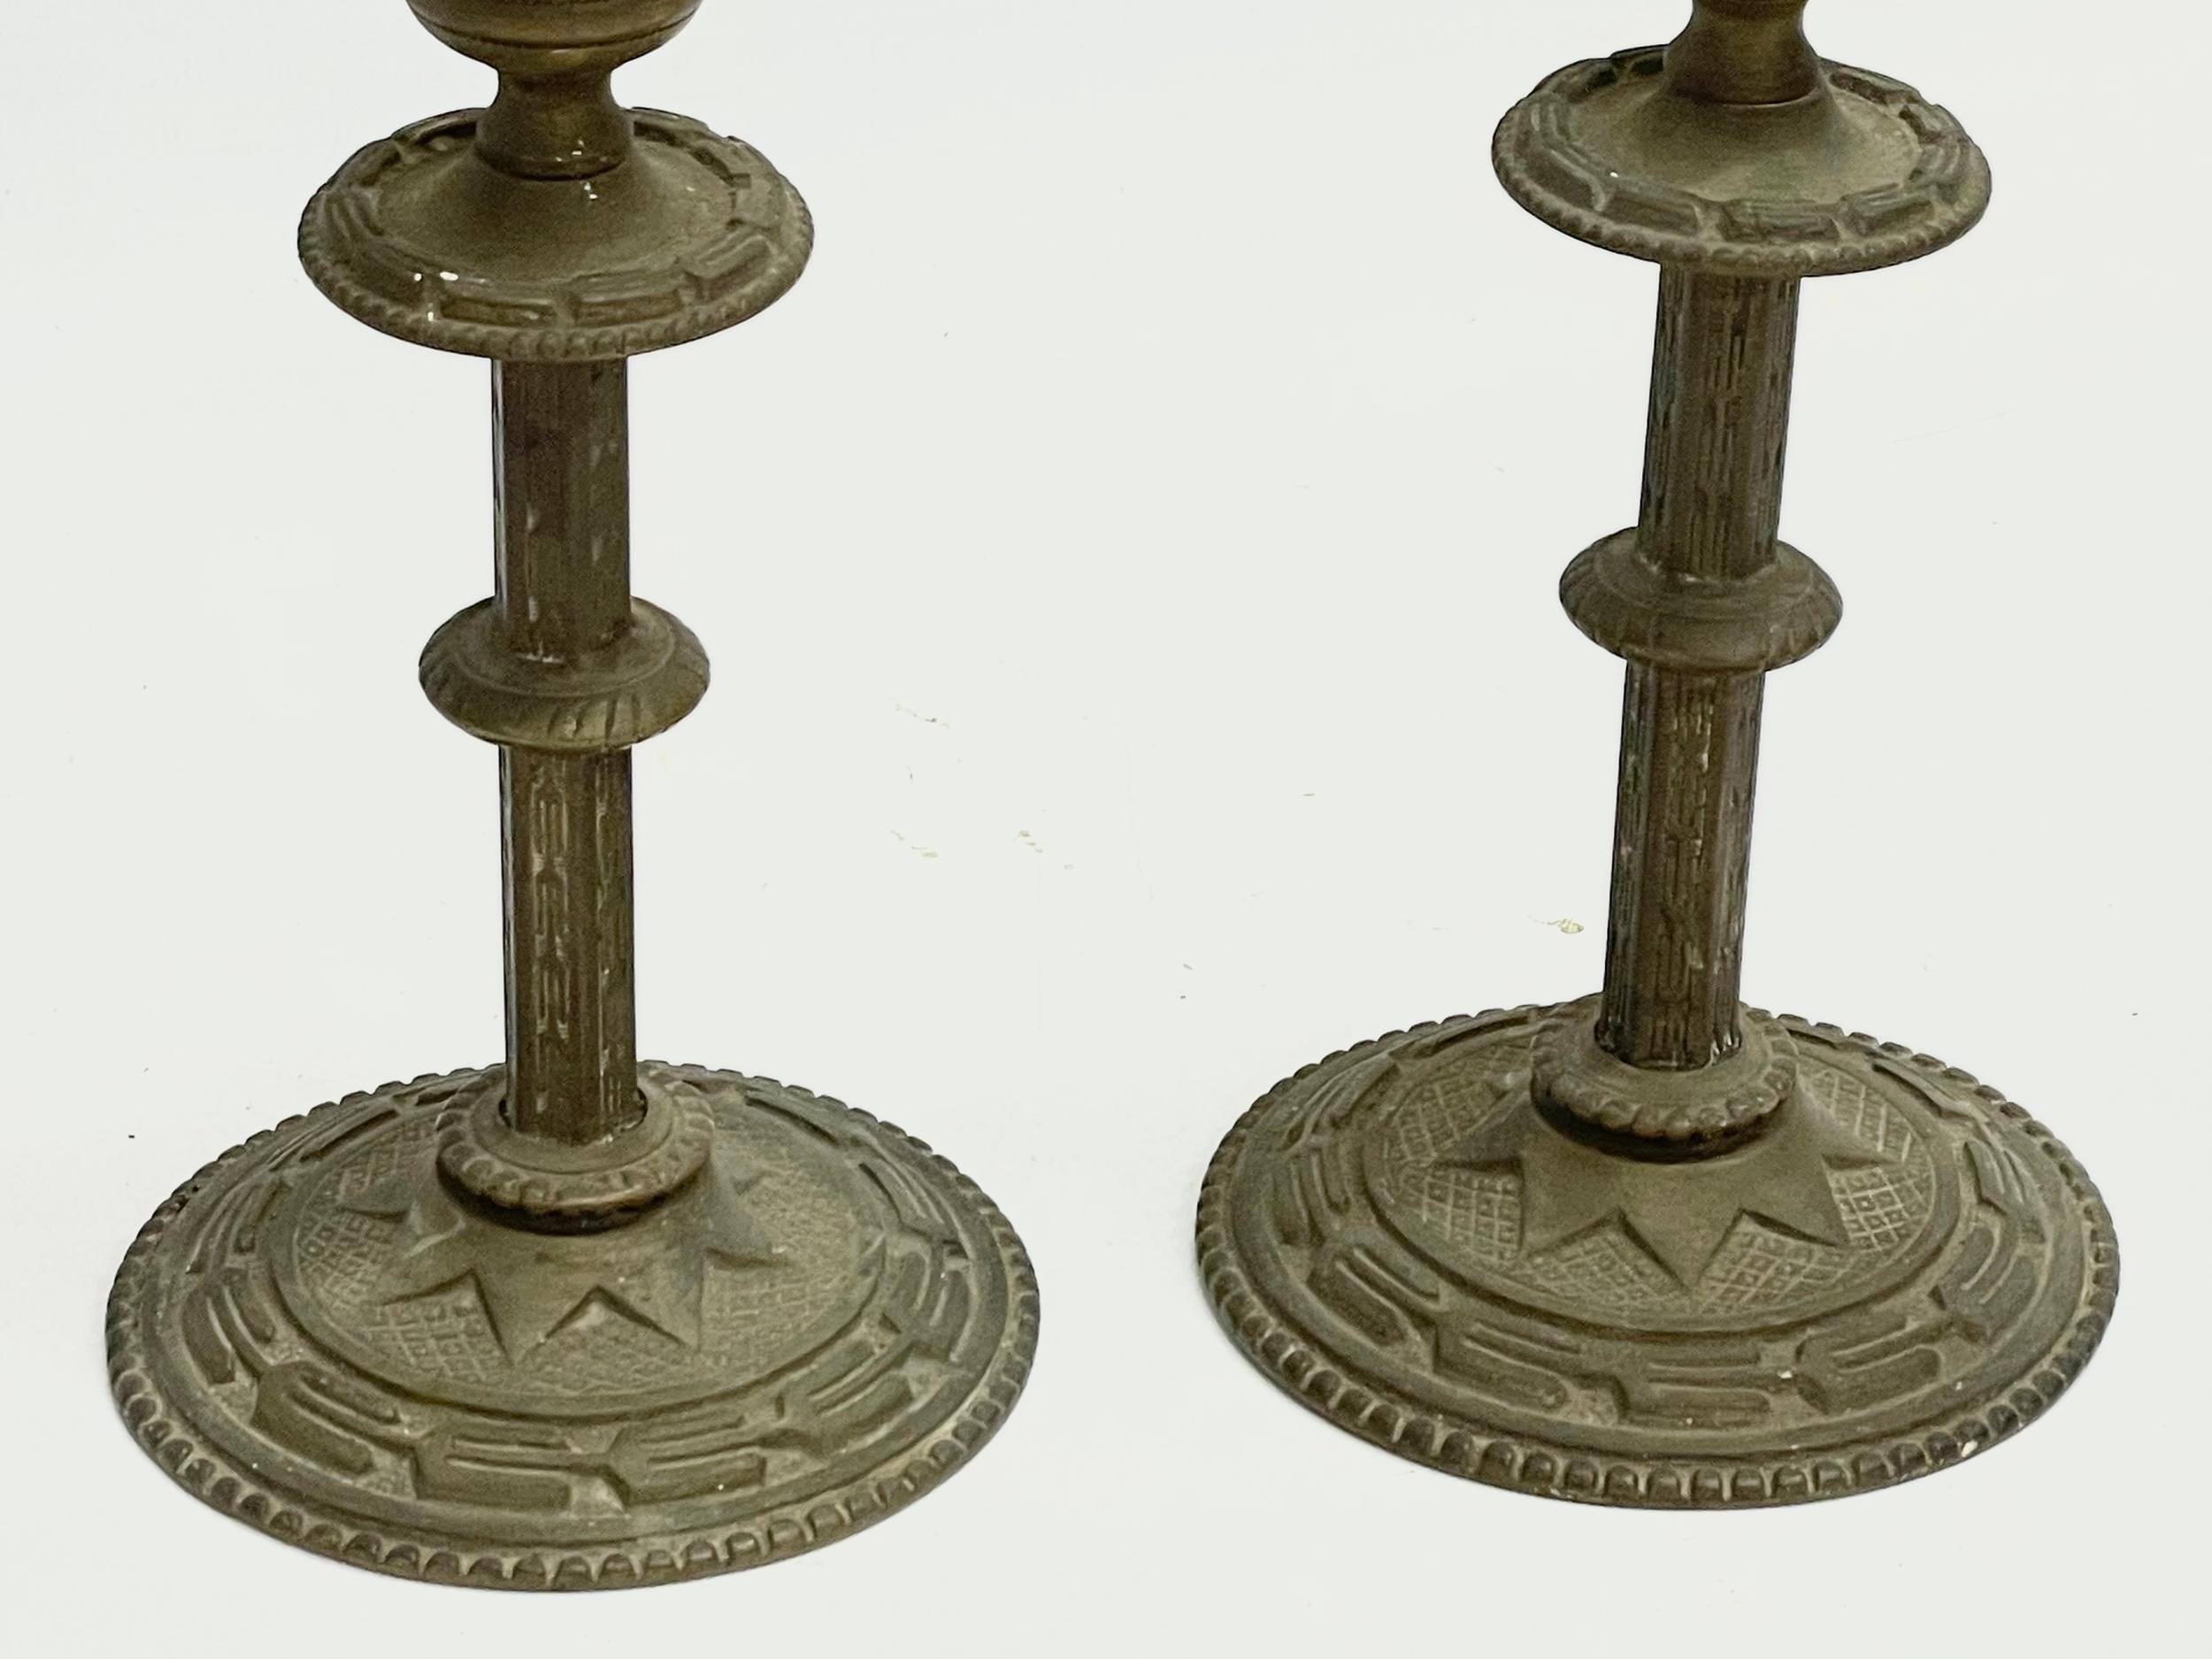 A 19th century spelter bust on stand with a pair of late 19th century brass candlesticks. Bust - Image 3 of 6